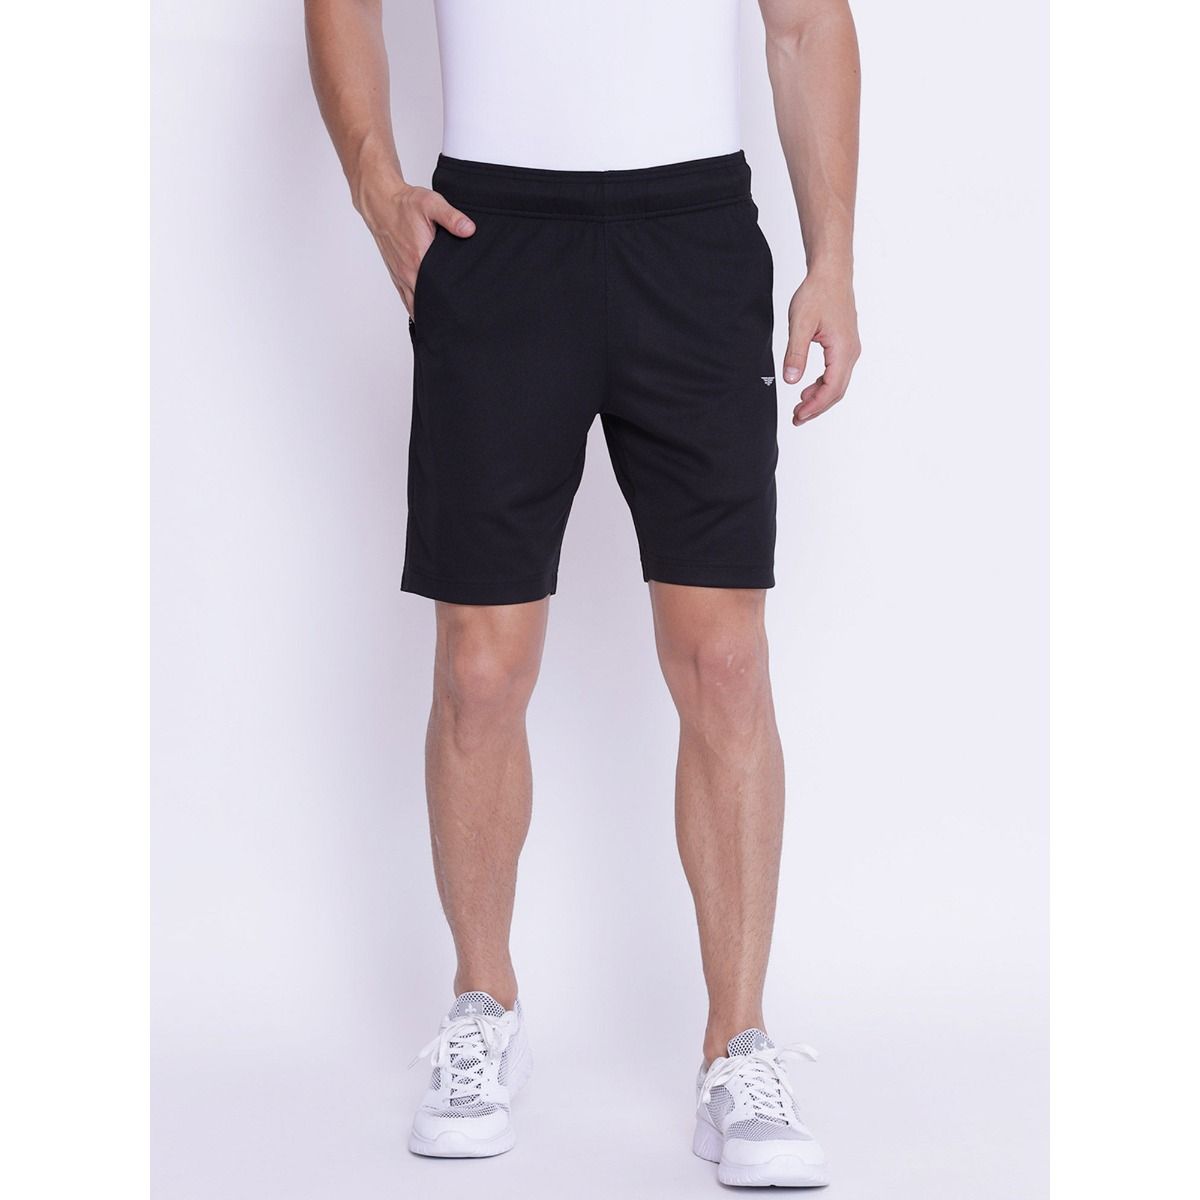 Fuaark - Black Polyester Men's Sports Joggers ( Pack of 1 ) - Buy Fuaark -  Black Polyester Men's Sports Joggers ( Pack of 1 ) Online at Best Prices in  India on Snapdeal